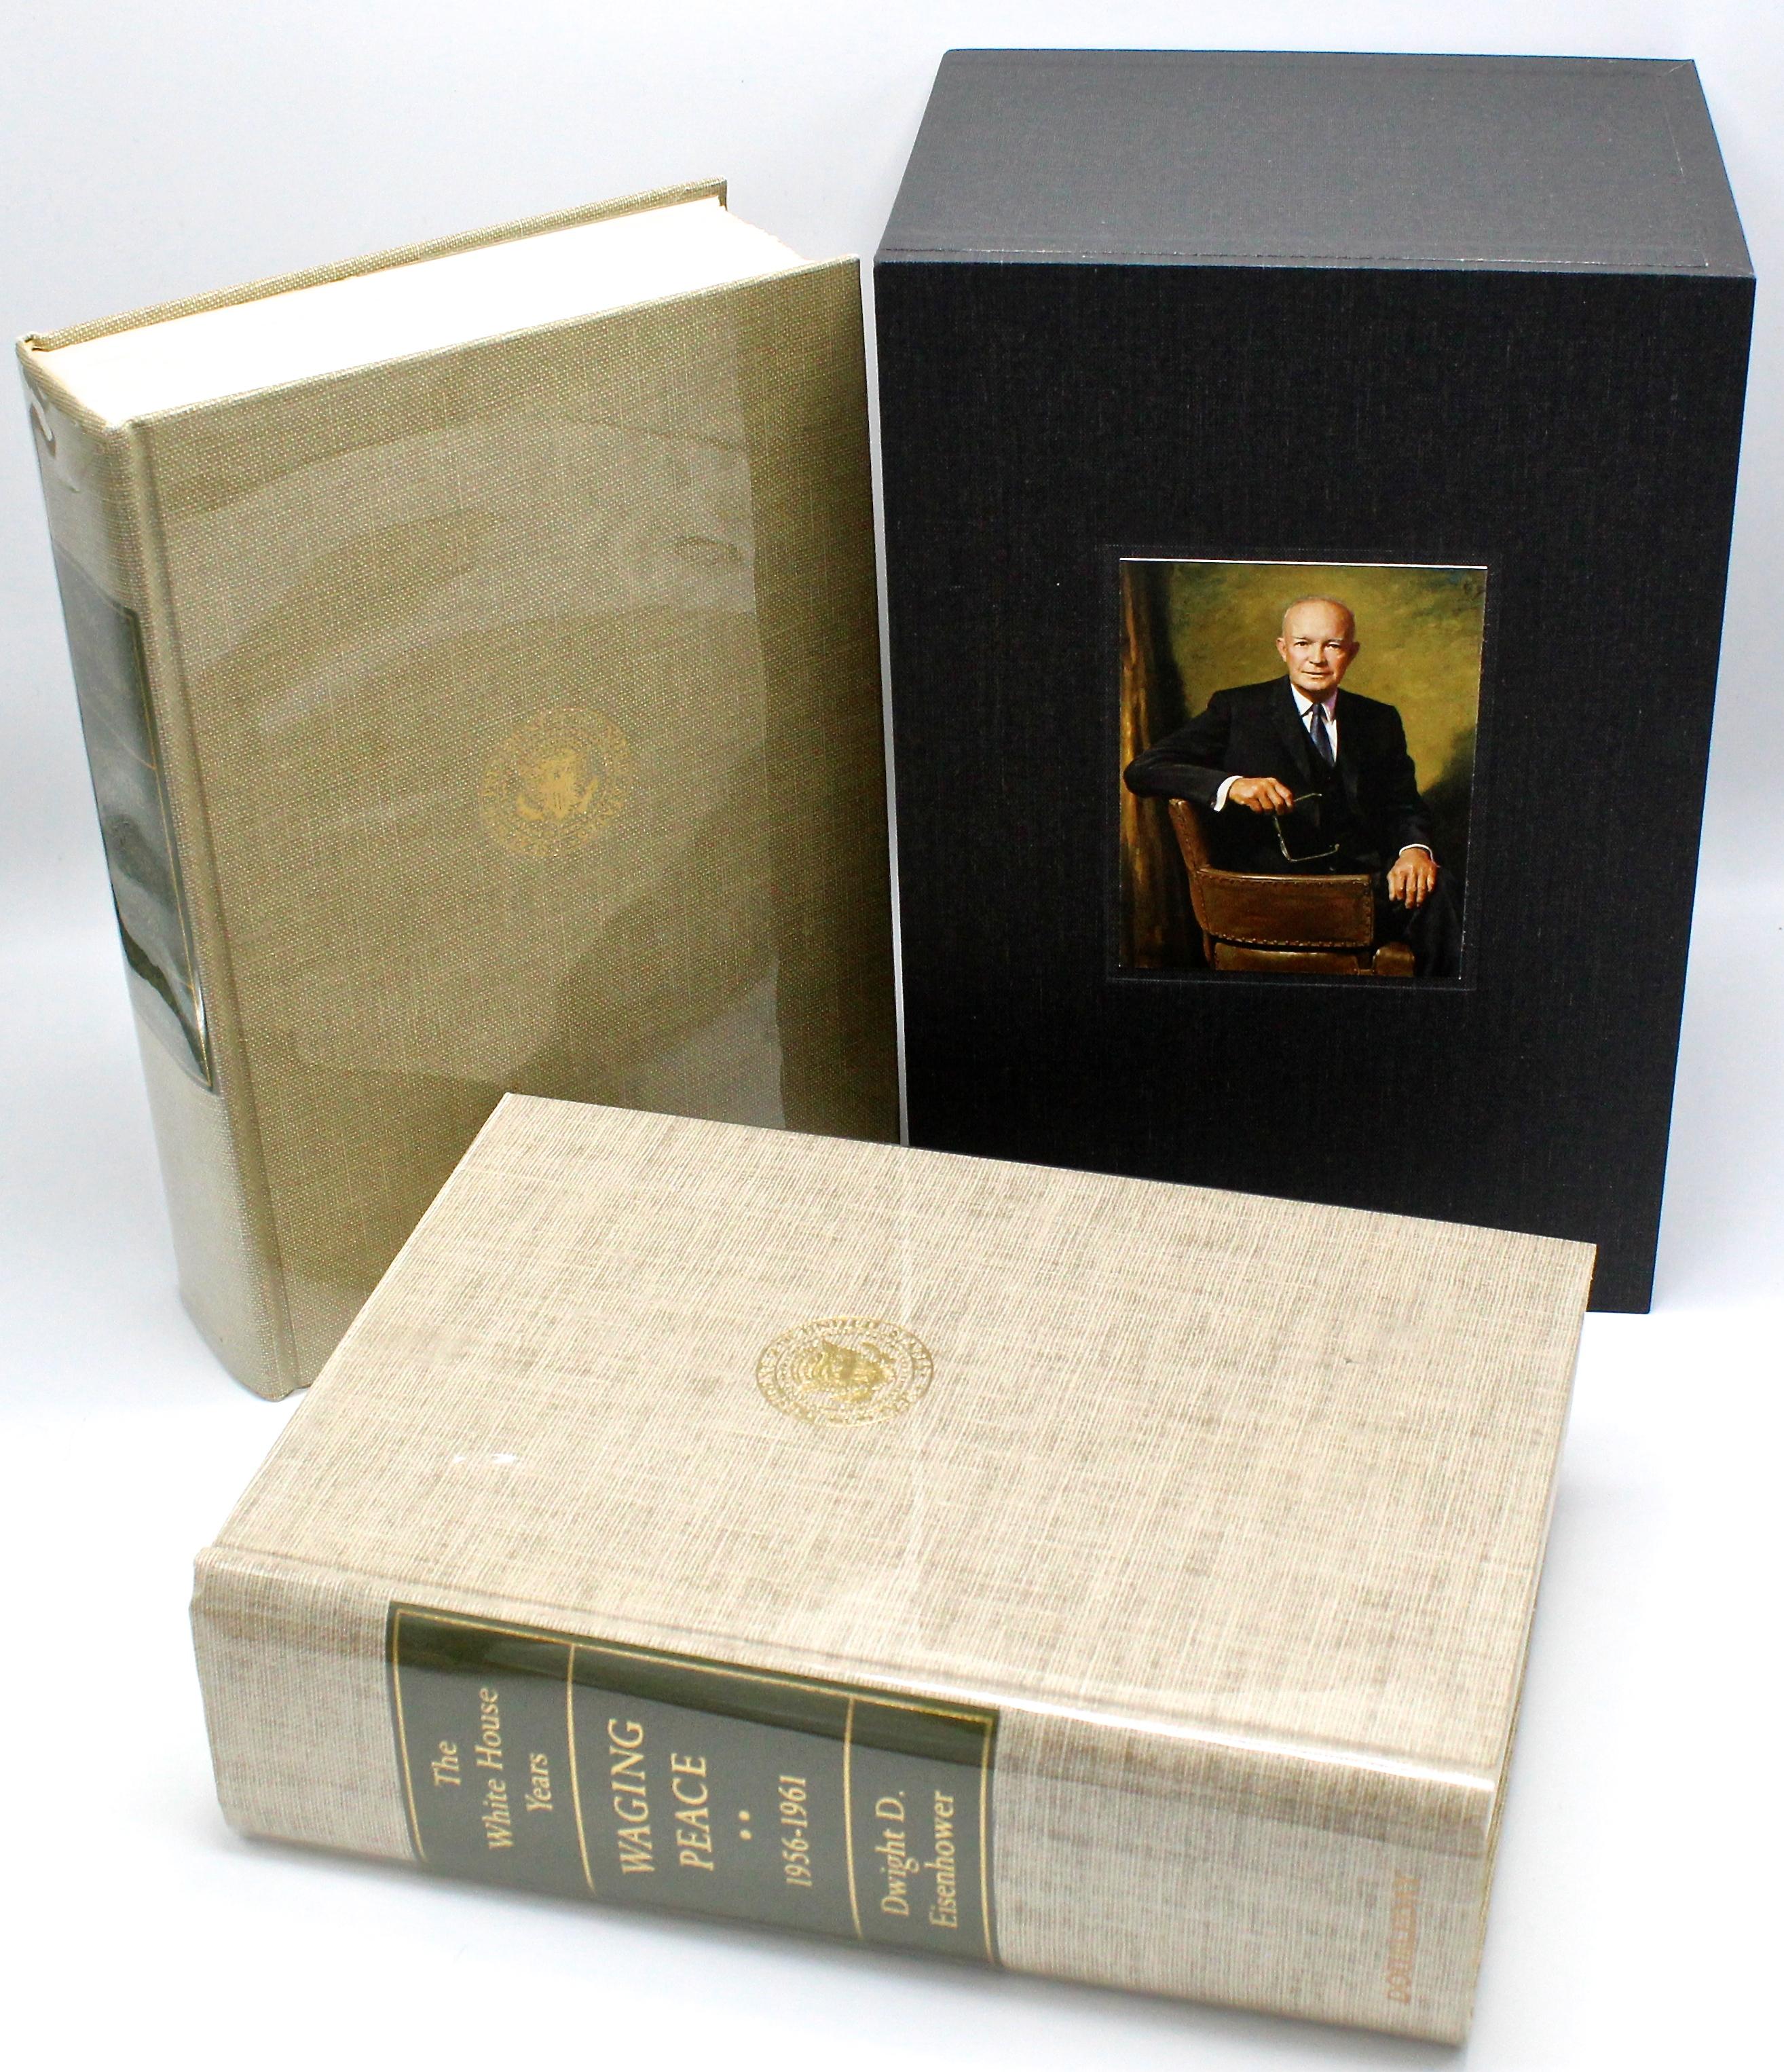 Eisenhower, Dwight D., The White House Years: Mandate for Change, The White House Years: Waging Peace. New York: Double Day & Company, 1963, 1965. Limited editions, two volumes, signed. Original bindings, housed in a custom slipcase.

Offered are